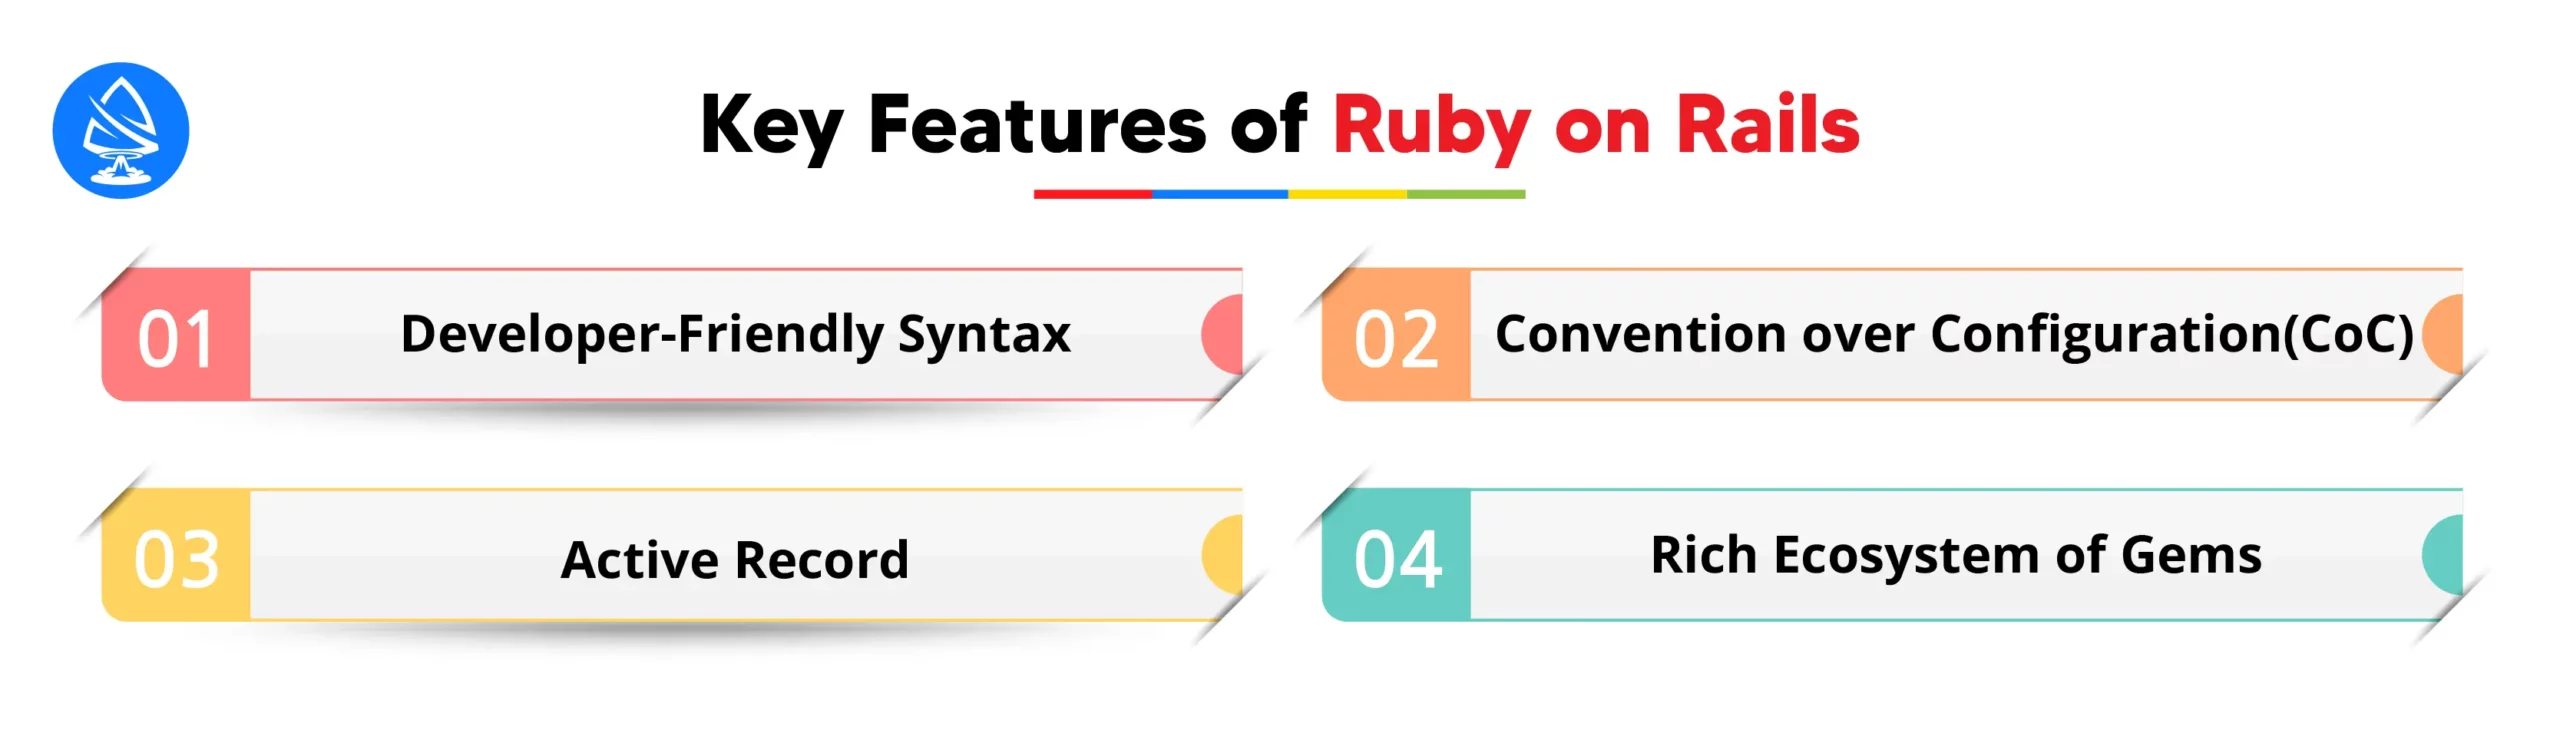 Key Features of Ruby on Rails 